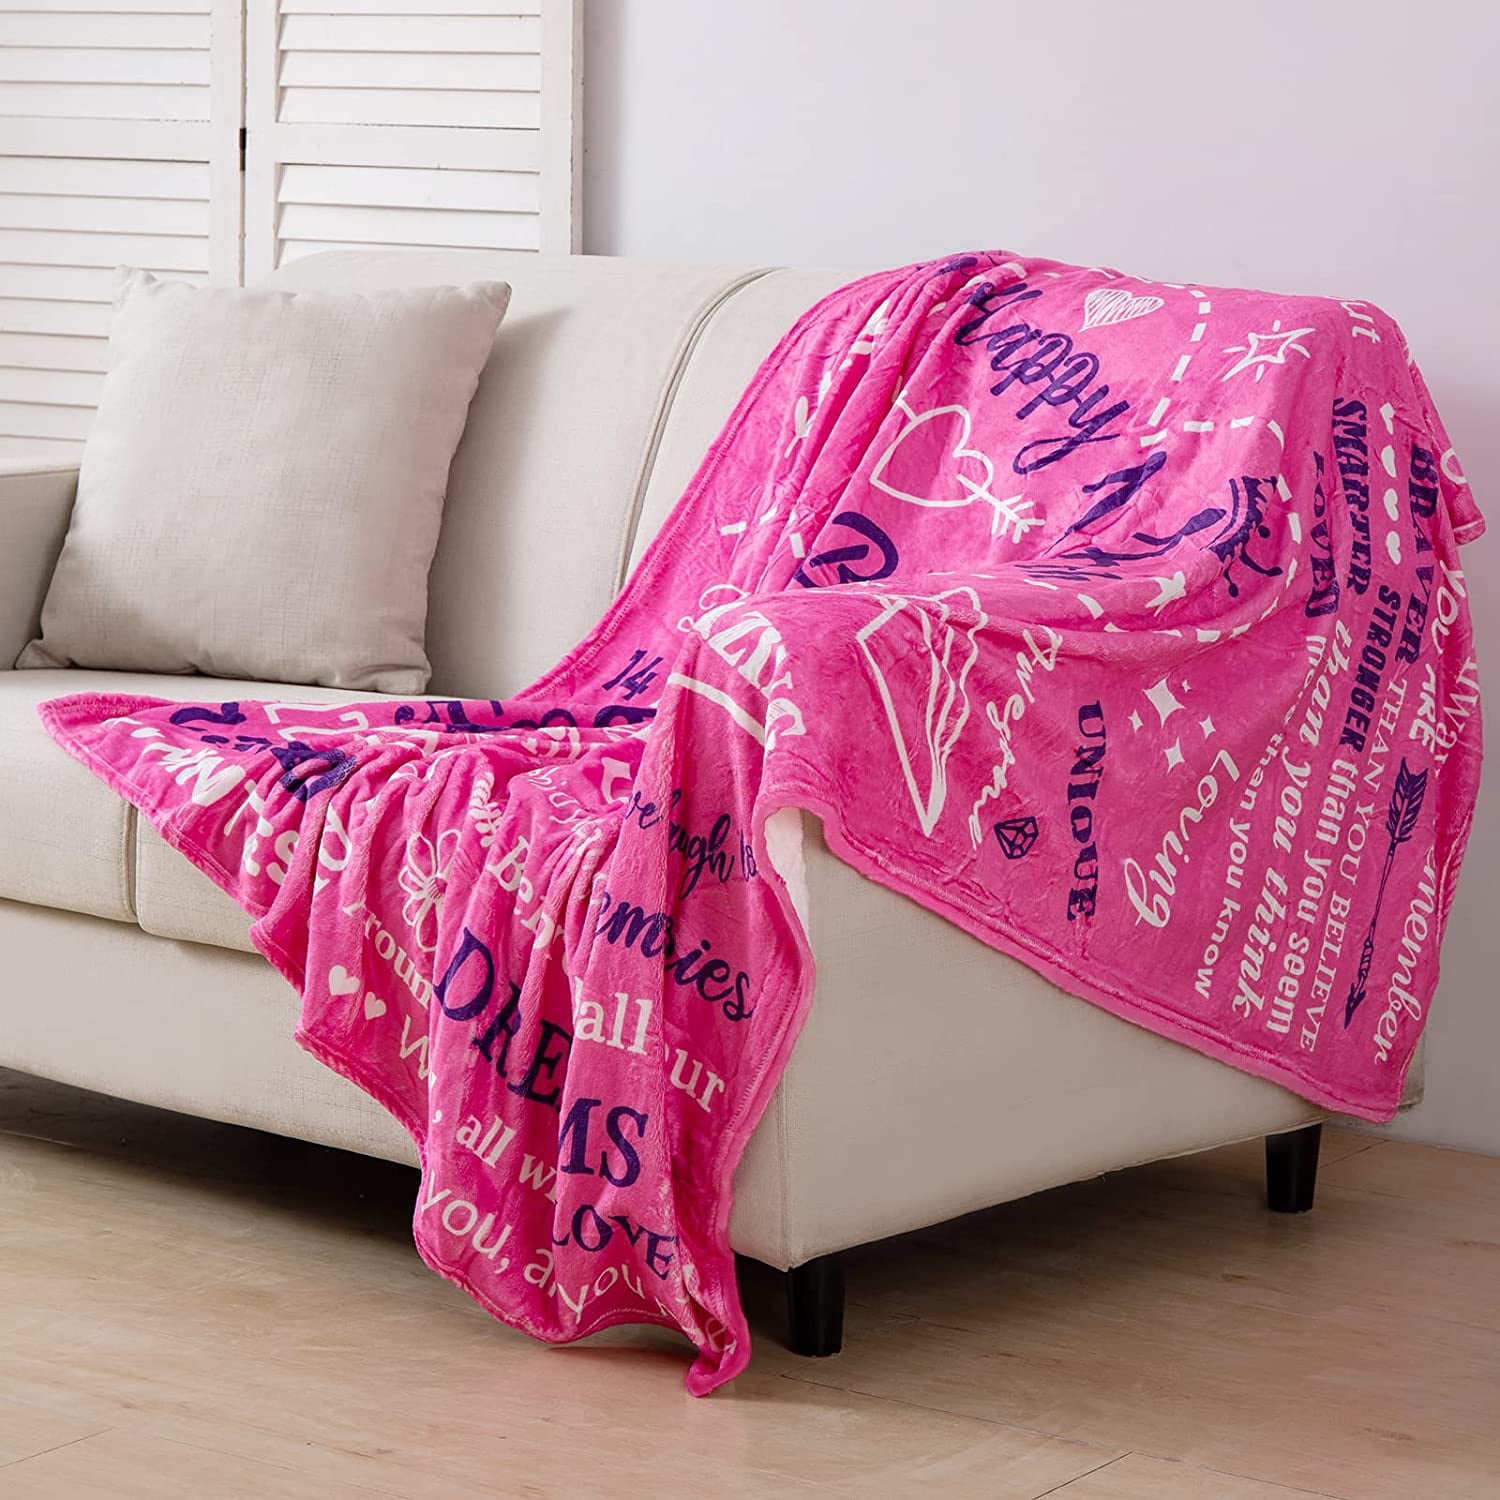 OWL QUEEN 15th Birthday Gifts for Girls - Best Gifts for 15 Year Old Girls  Throw Blanket,Gifts for 15 Year Old Girls Teenage Girls Birthday